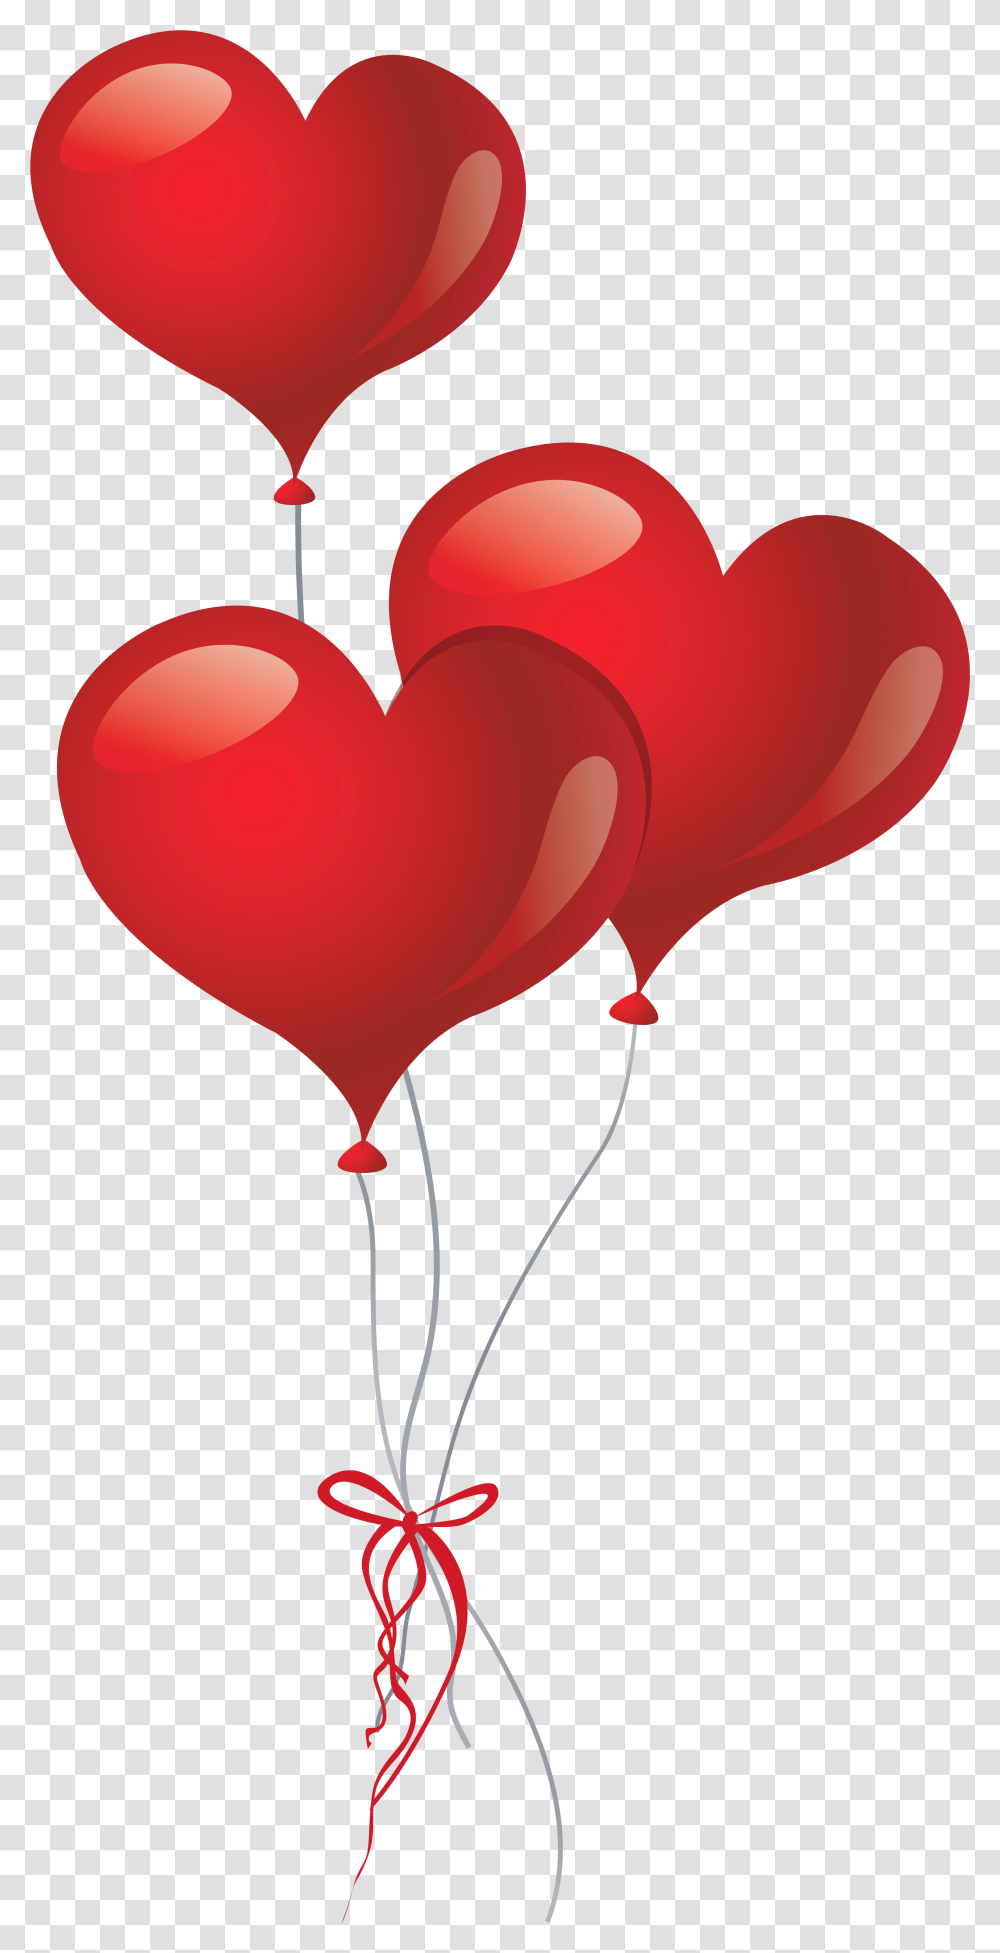 Heart Balloons Clipart Picture Nel 2020 Idee Per Heart Balloons, Bird, Animal Transparent Png